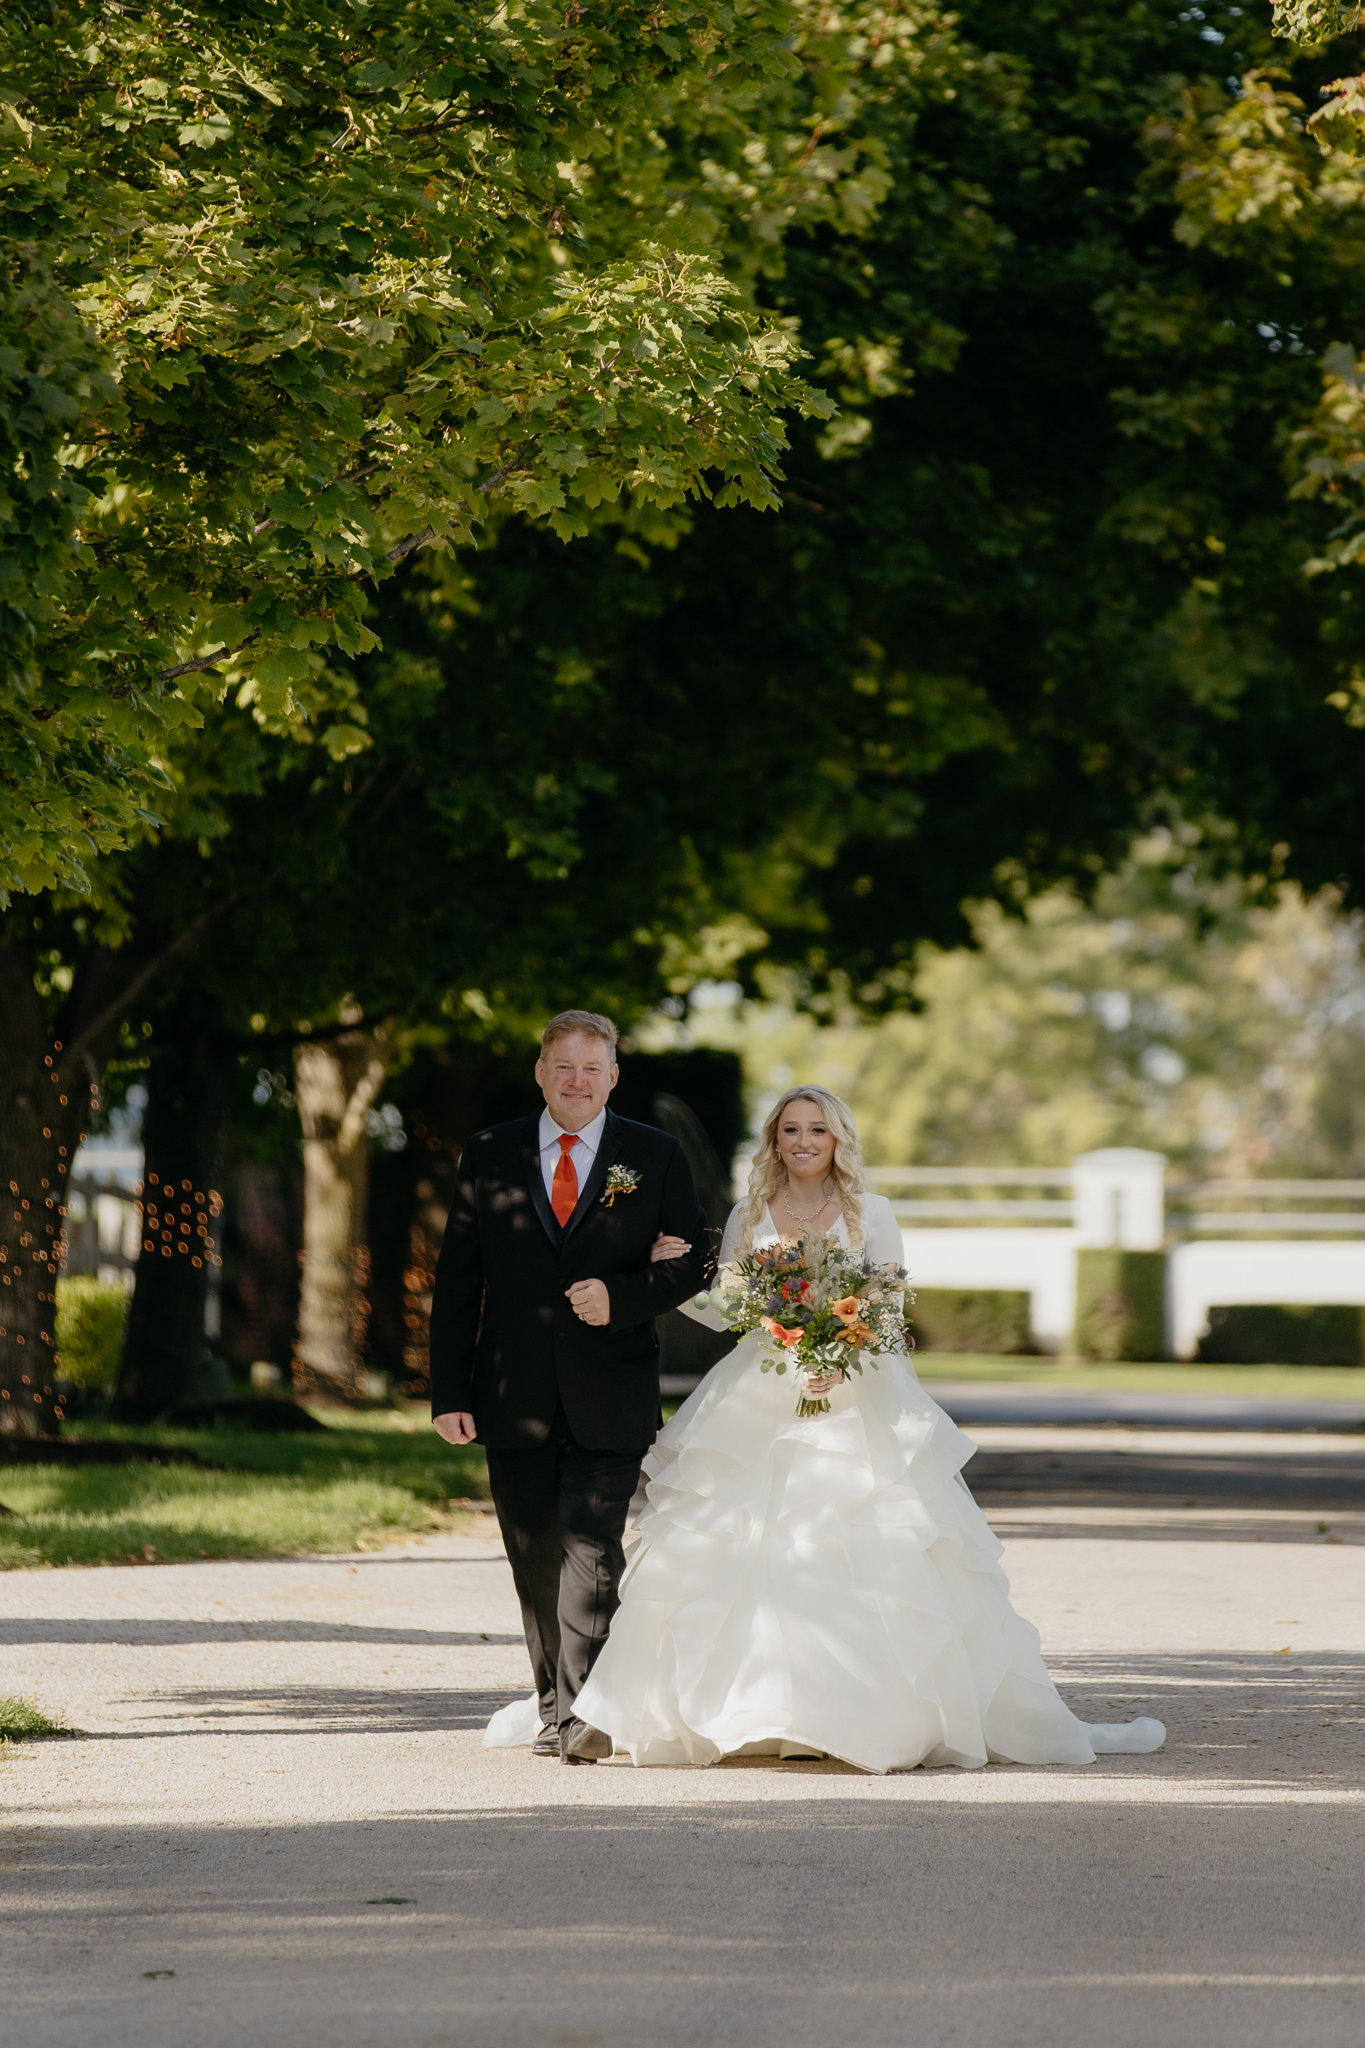 Bride in wedding dress walking down tree lined driveway arm in arm with her father